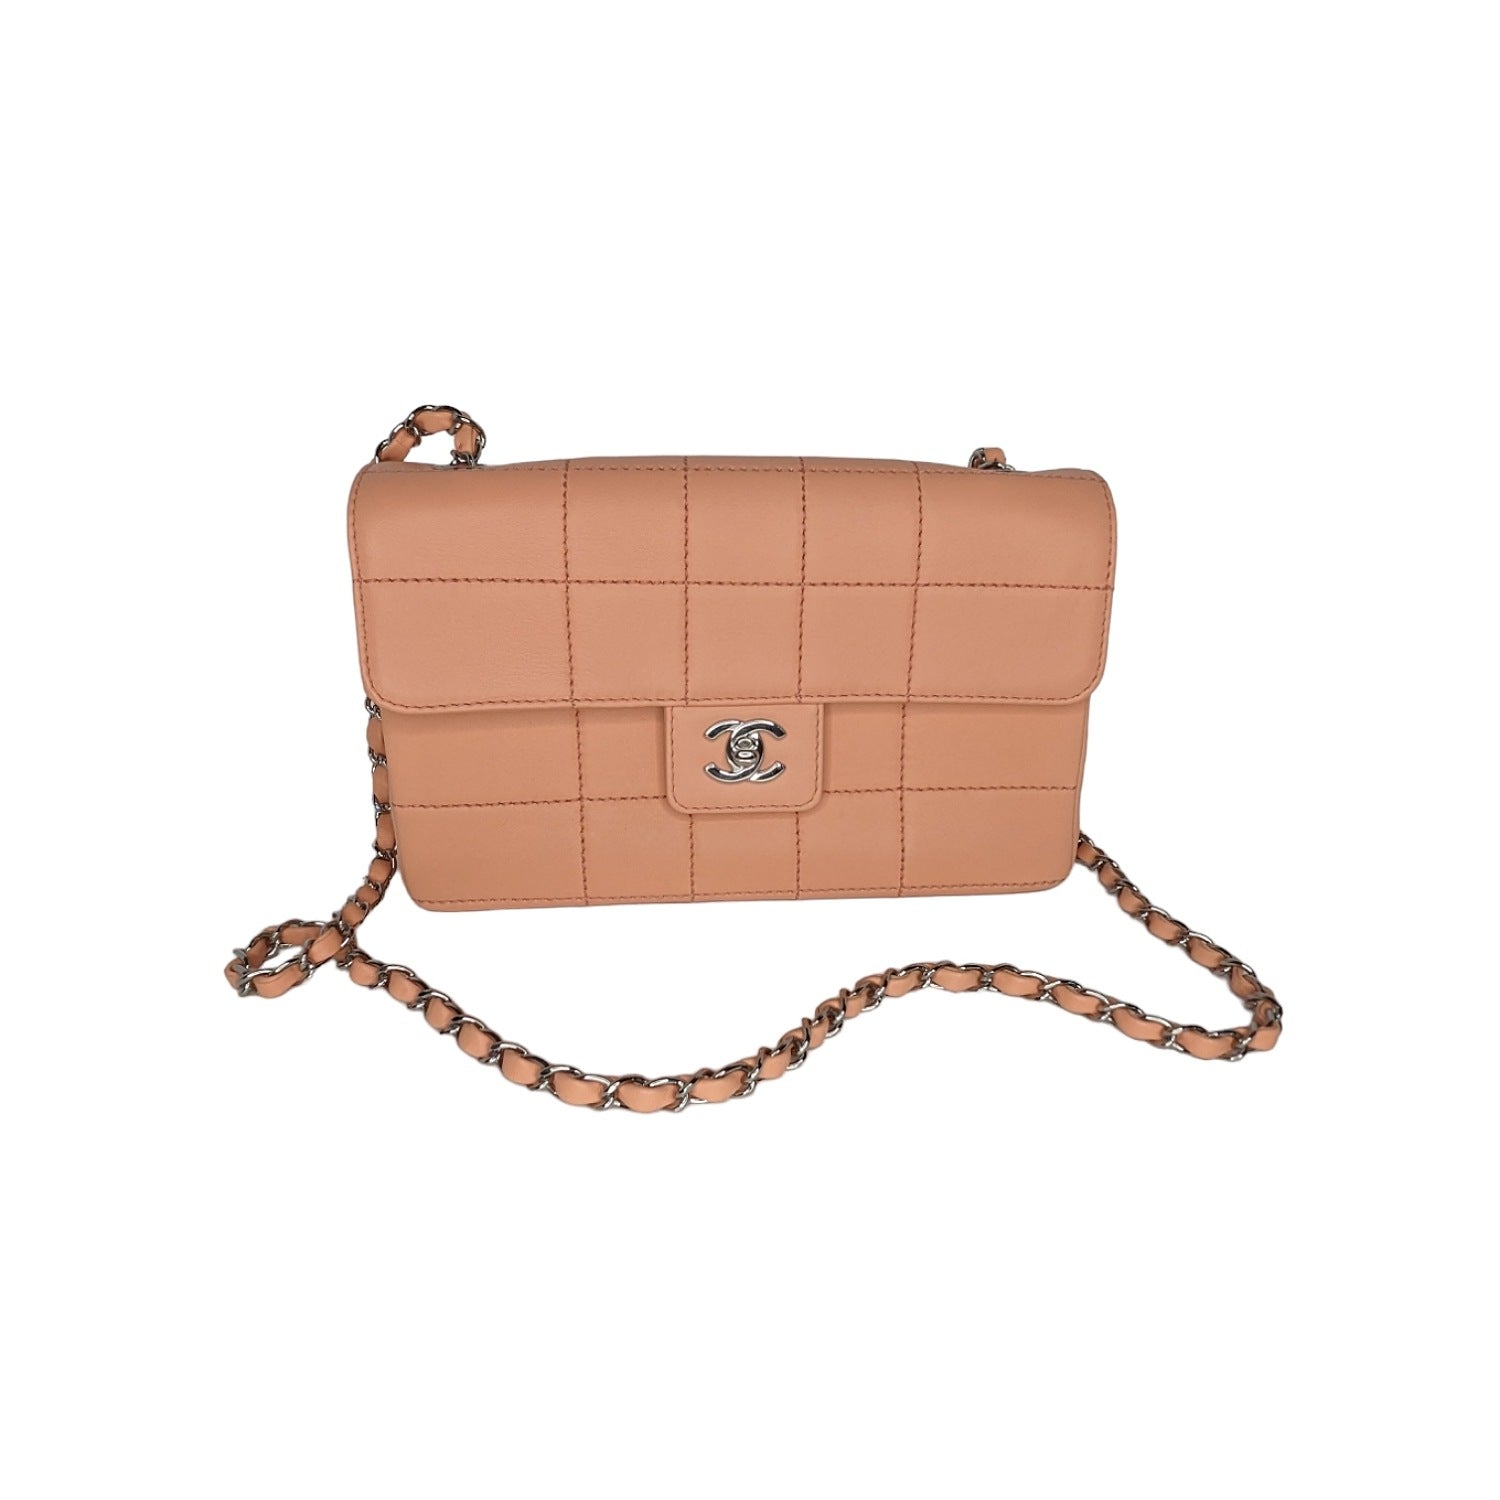 CHANEL Quilted Leather CC Logo Flap Messenger Bag Peach